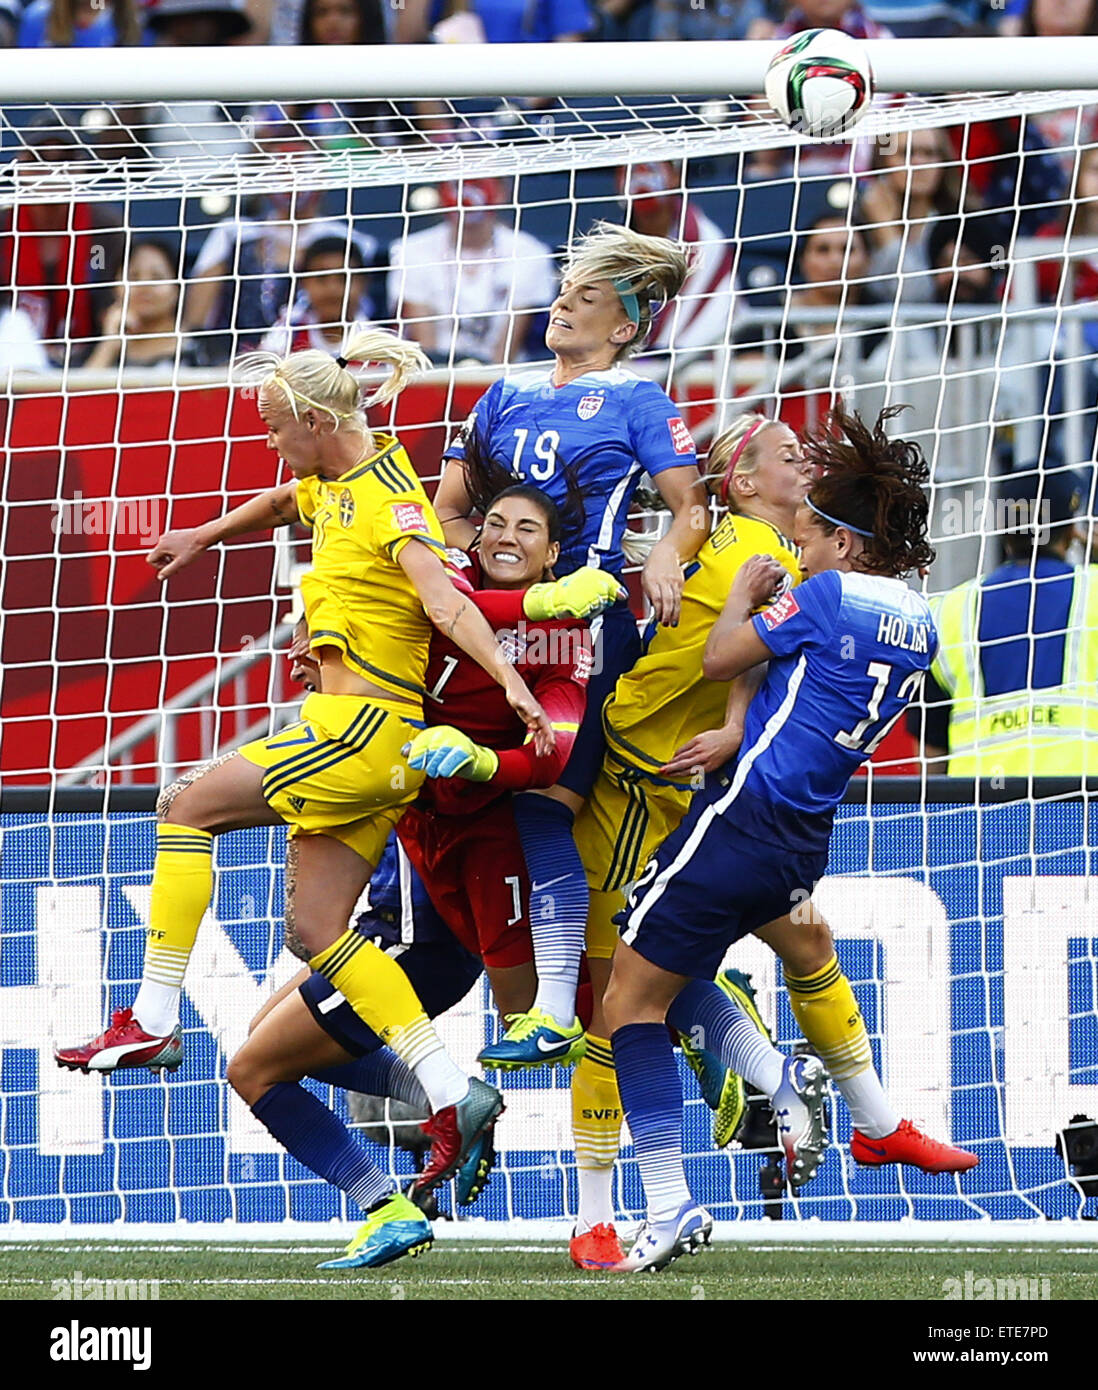 Winnipeg, Canada. 12th June, 2015. Hope Solo (2nd L), goalkeeper of the United States, saves the ball during their Group D match against Sweden at Winnipeg Stadium in Winnipeg, Canada on June 12, 2015. (Xinhua/Ding Xu) Credit:  Xinhua/Alamy Live News Stock Photo